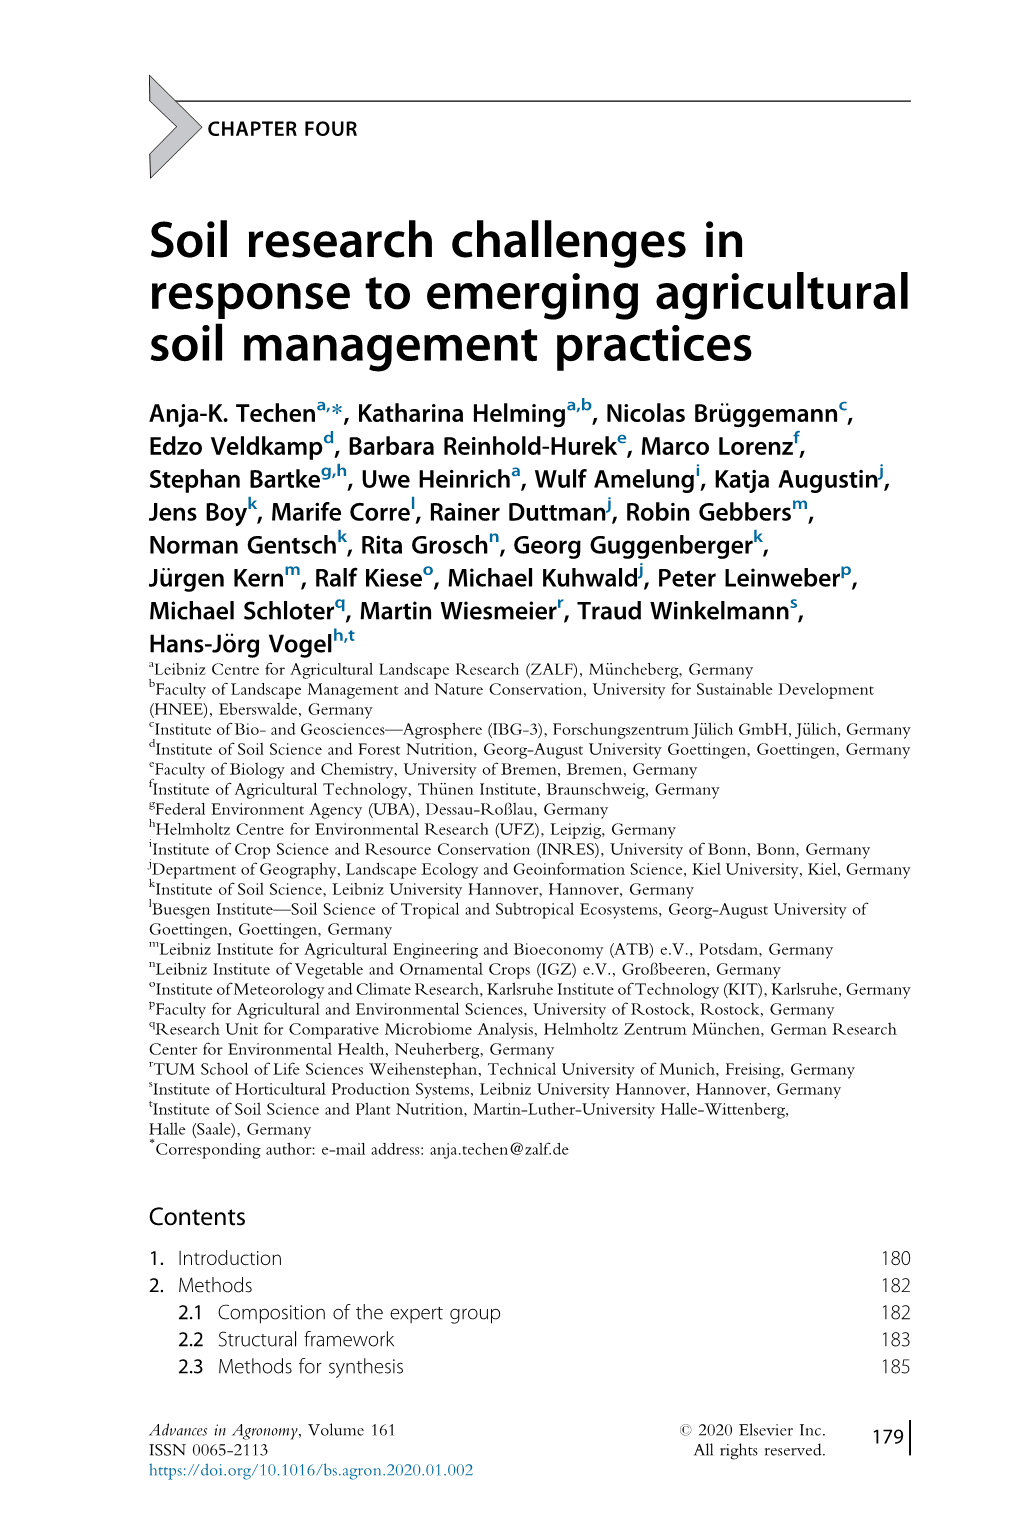 Soil Research Challenges in Response to Emerging Agricultural Soil Management Practices